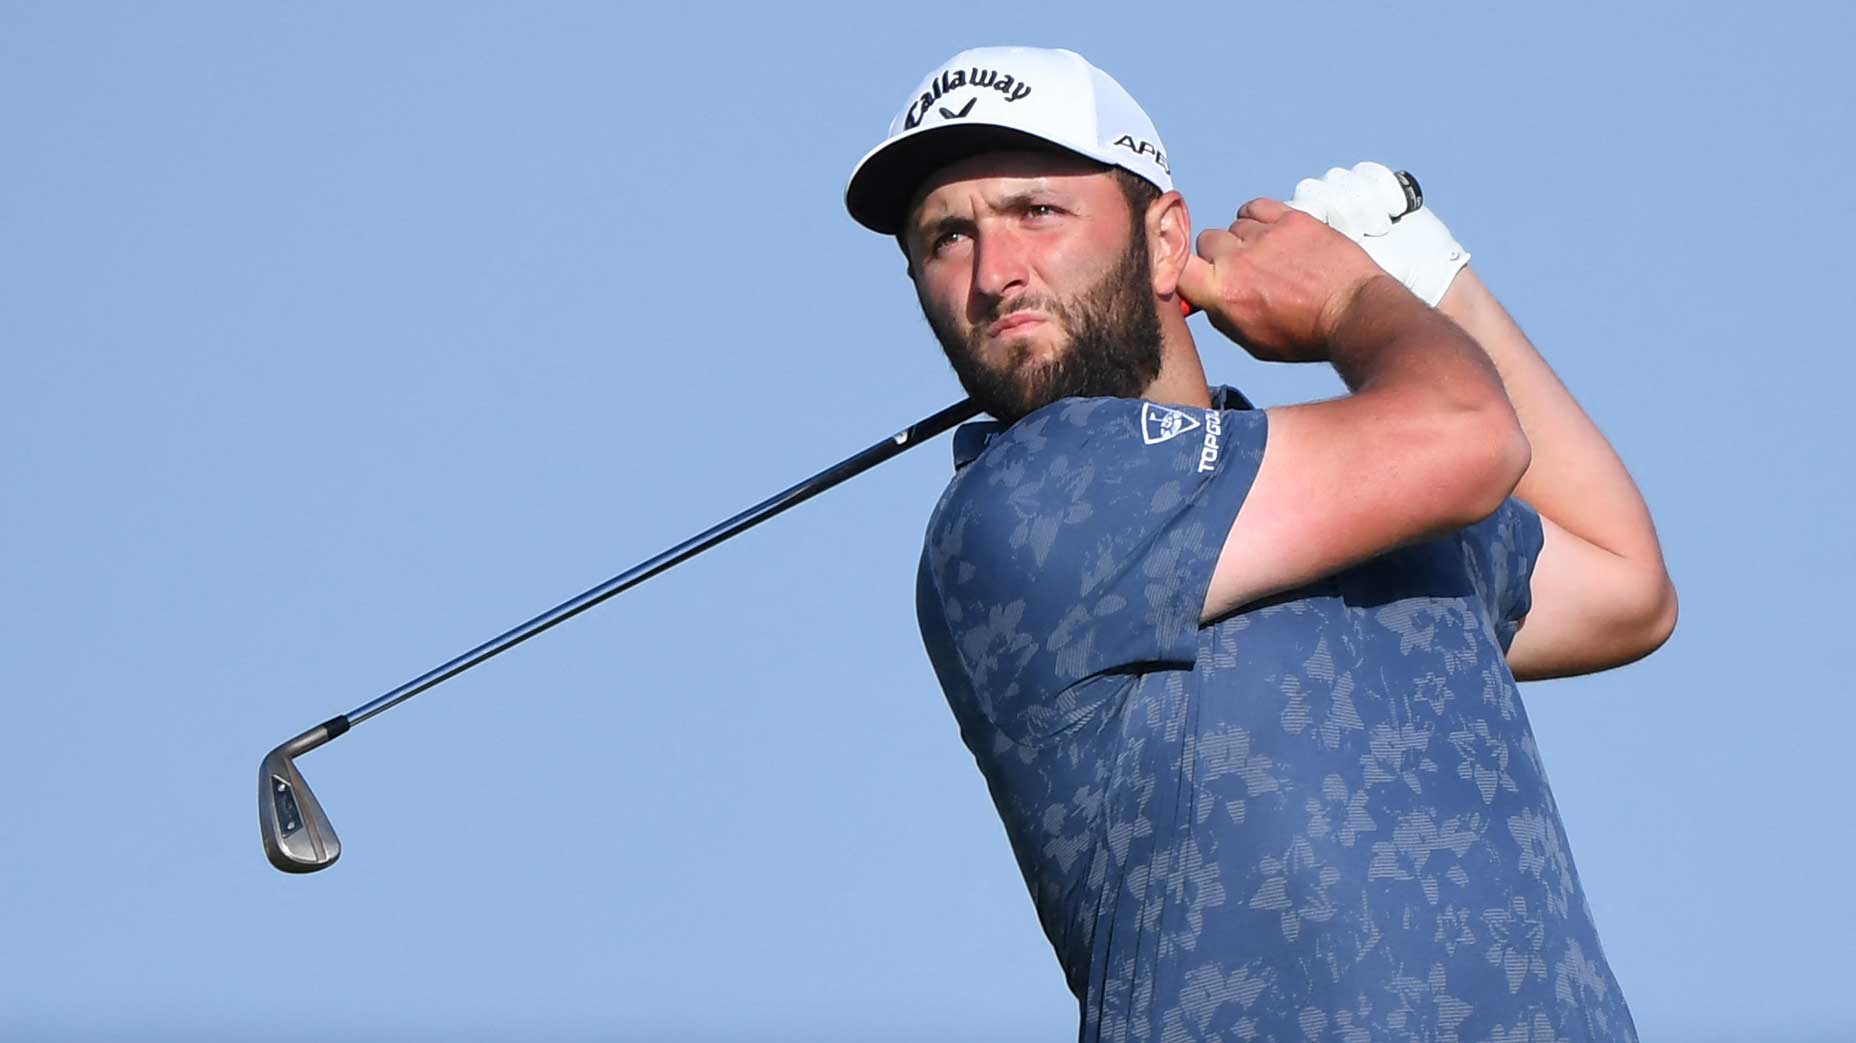 Even Jon Rahm couldn't believe the good fortune of this U.S. Open drop